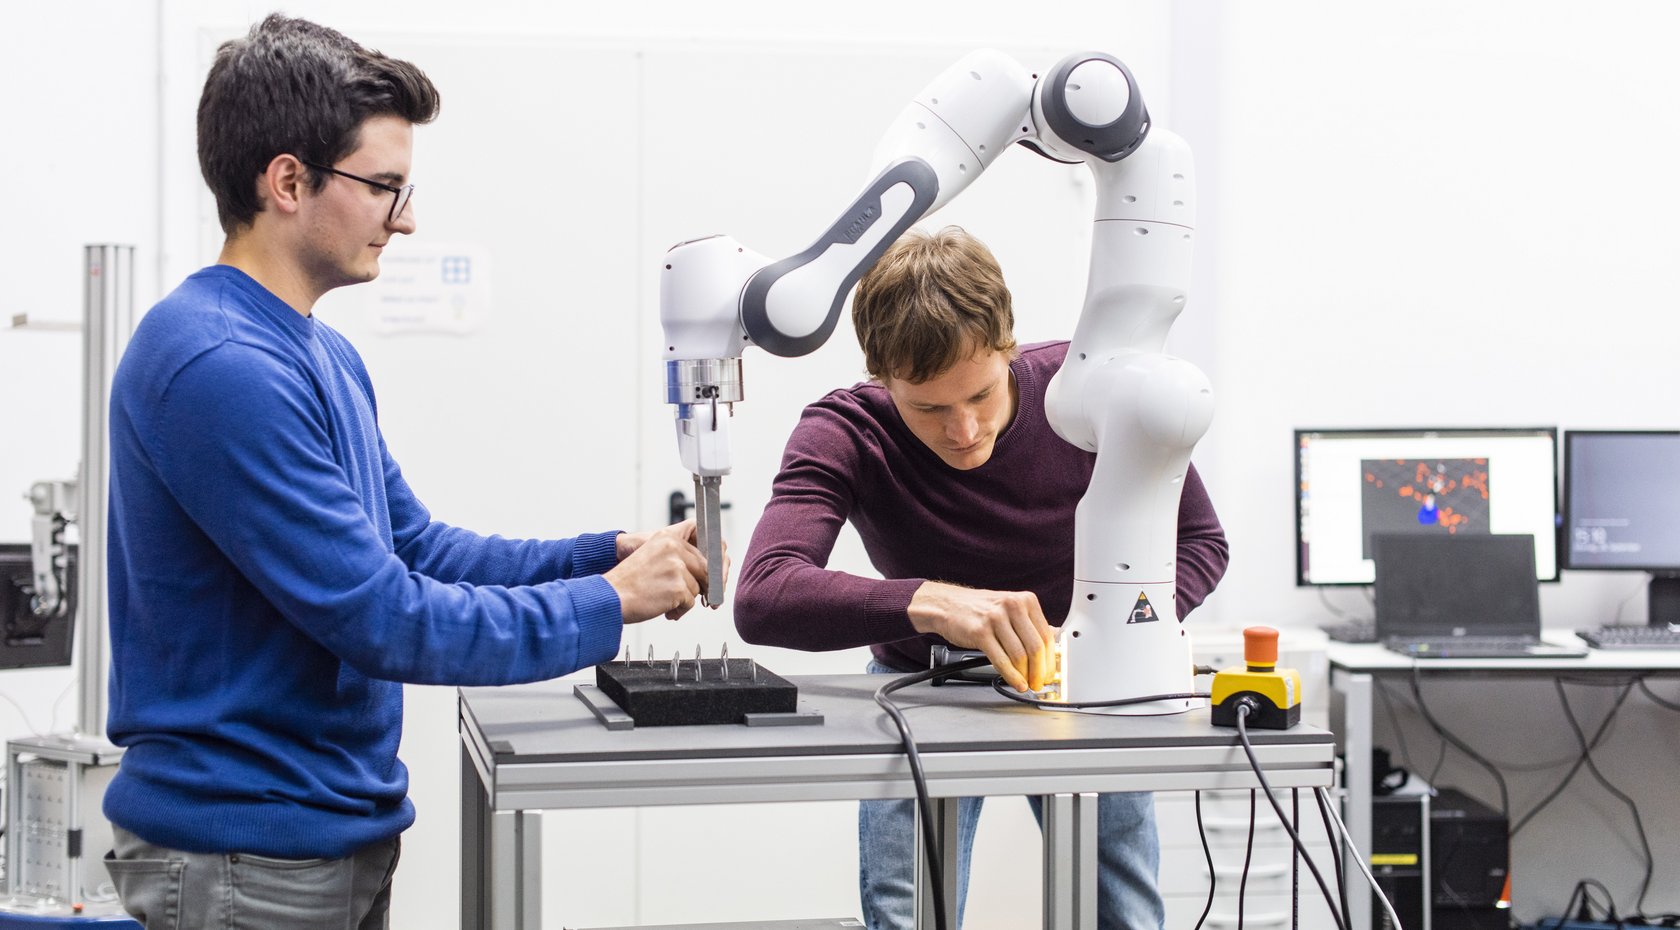 two students working on an industrial robot mounted on a table in the lab